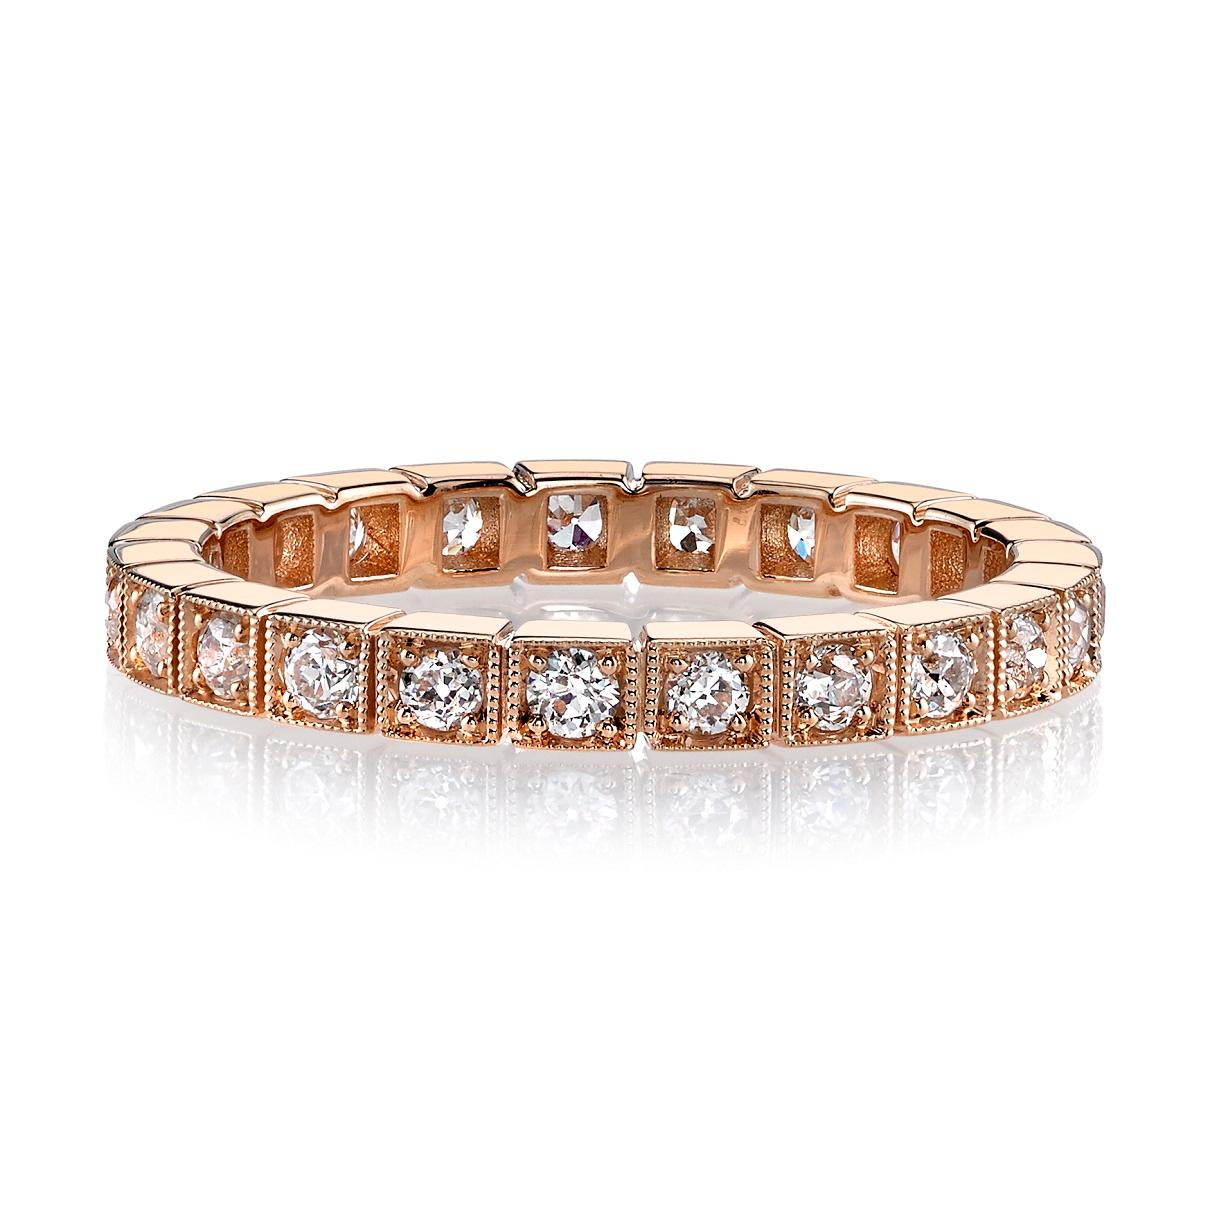 For Sale:  Handcrafted Becca Old European Cut Diamond Eternity Band by Single Stone 2